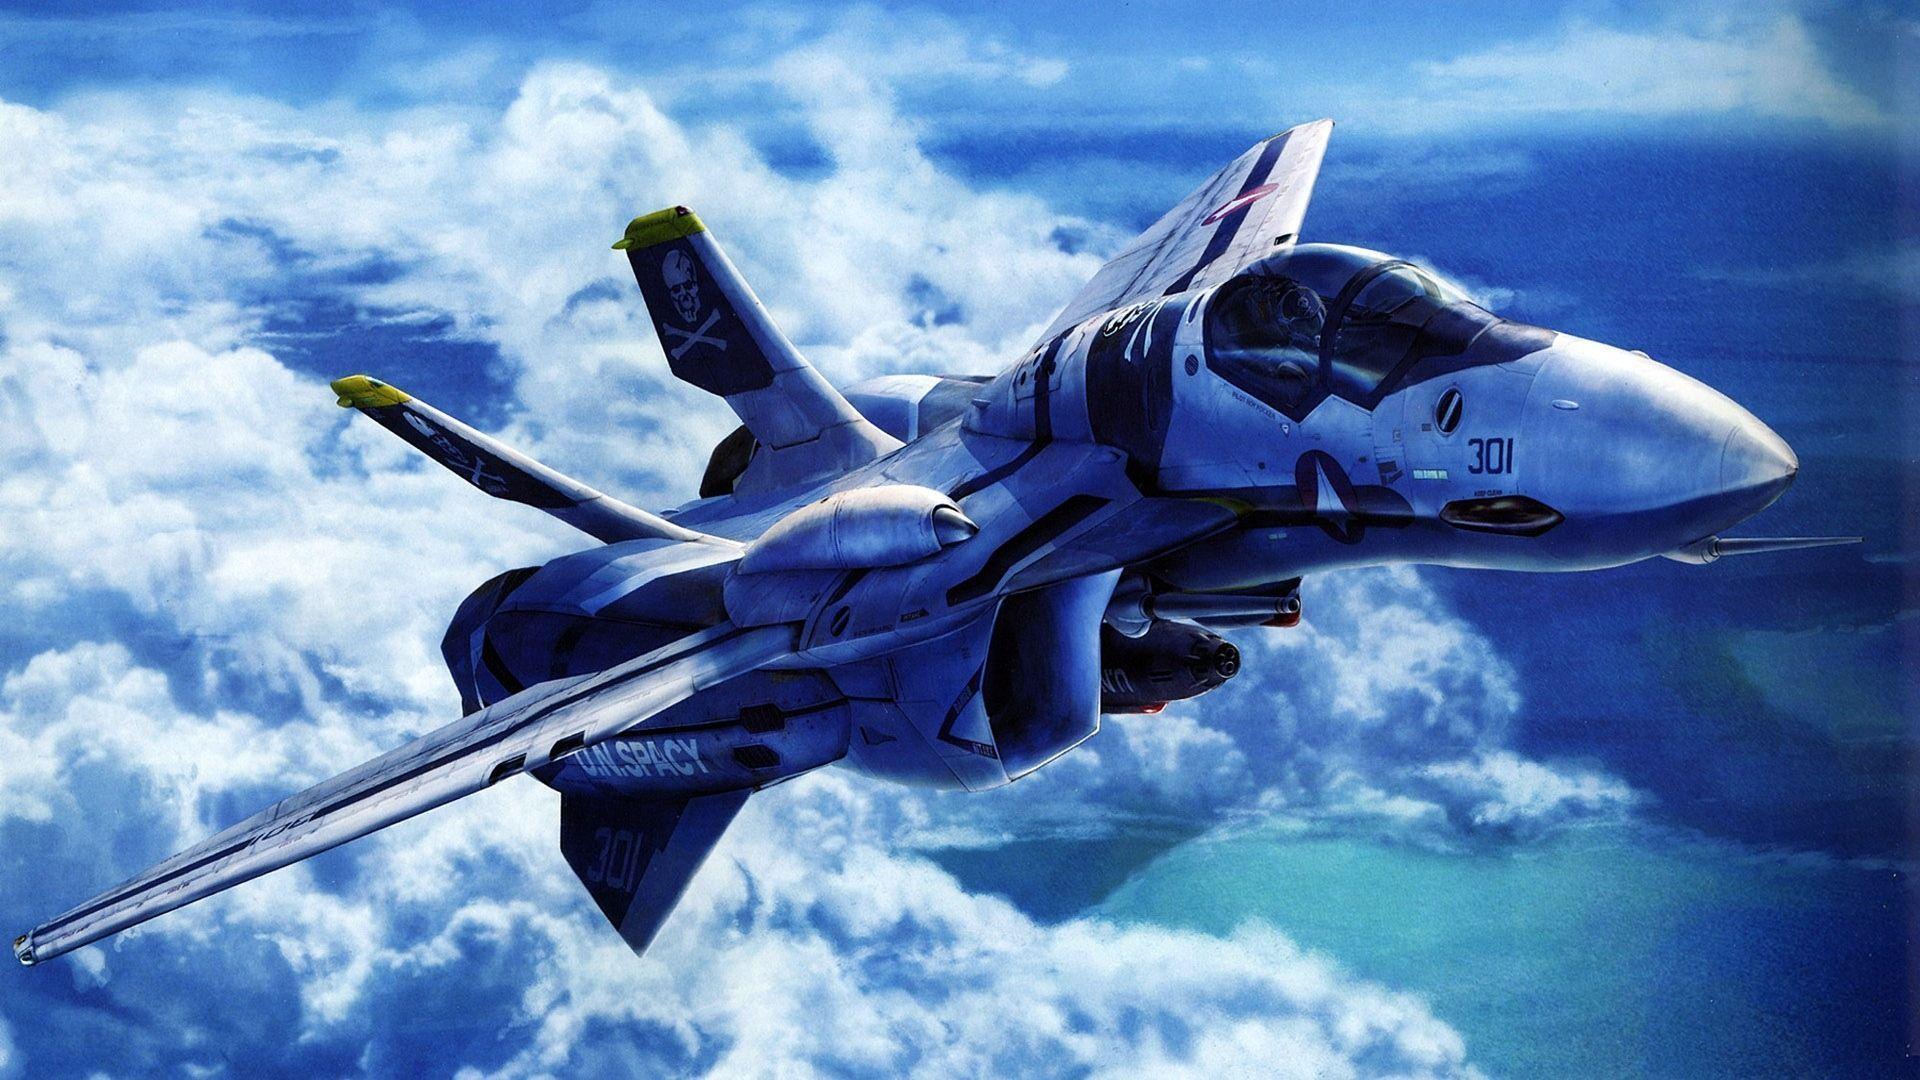 image For > Cool Fighter Planes Wallpaper